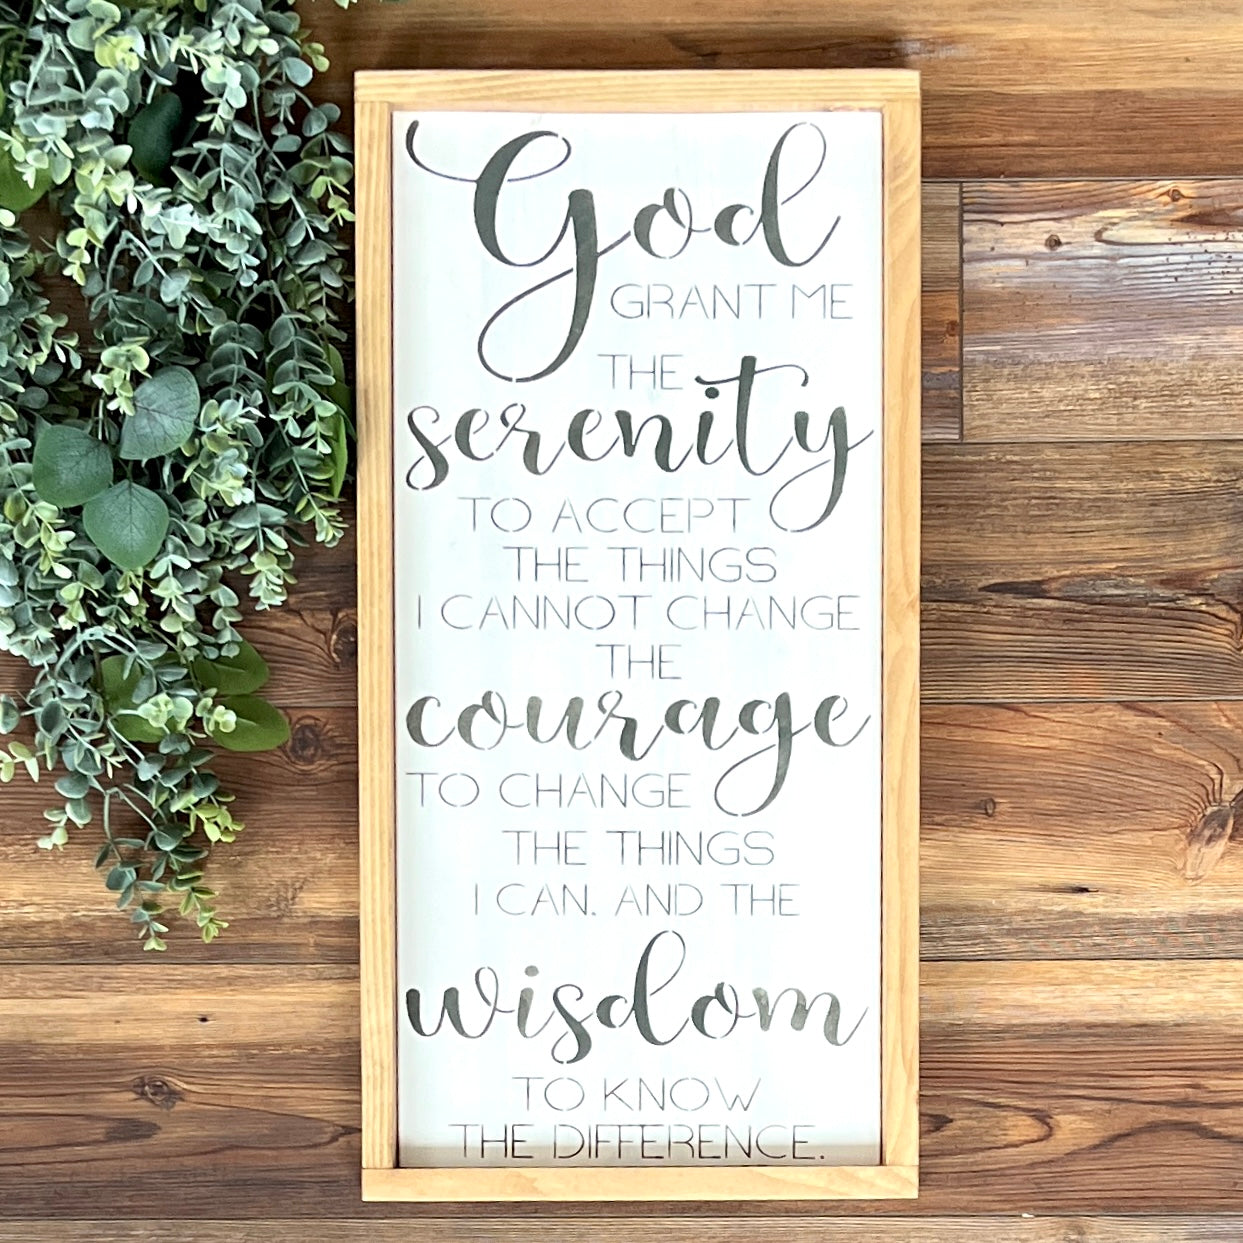 God Grant me the Serenity inspirational quote wood sign wall art